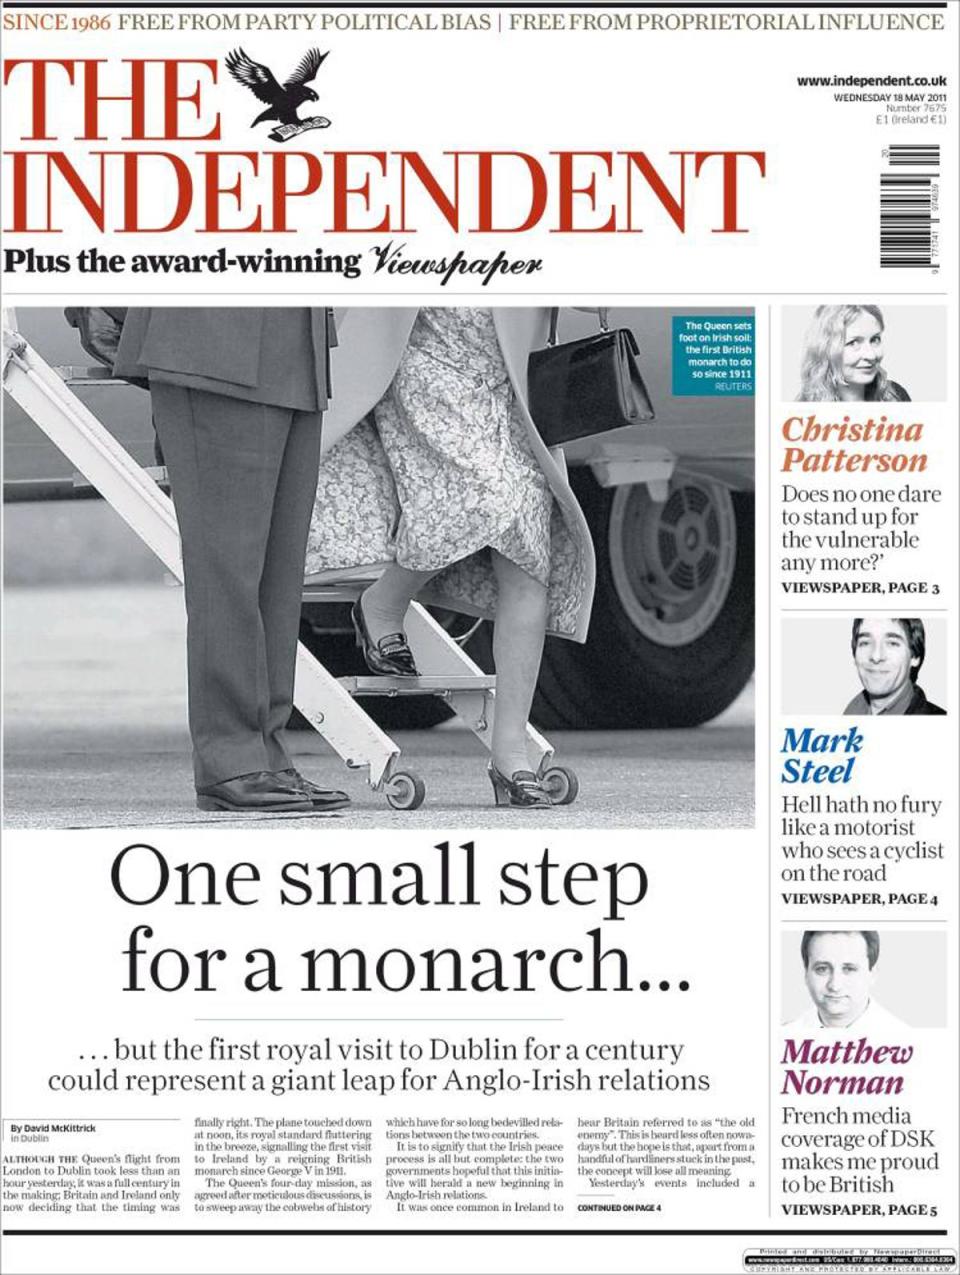 The Independent’s front cover from 18 May 2011, as the Queen became the first monarch to visit the Republic of Ireland in 100 years (The Independent)